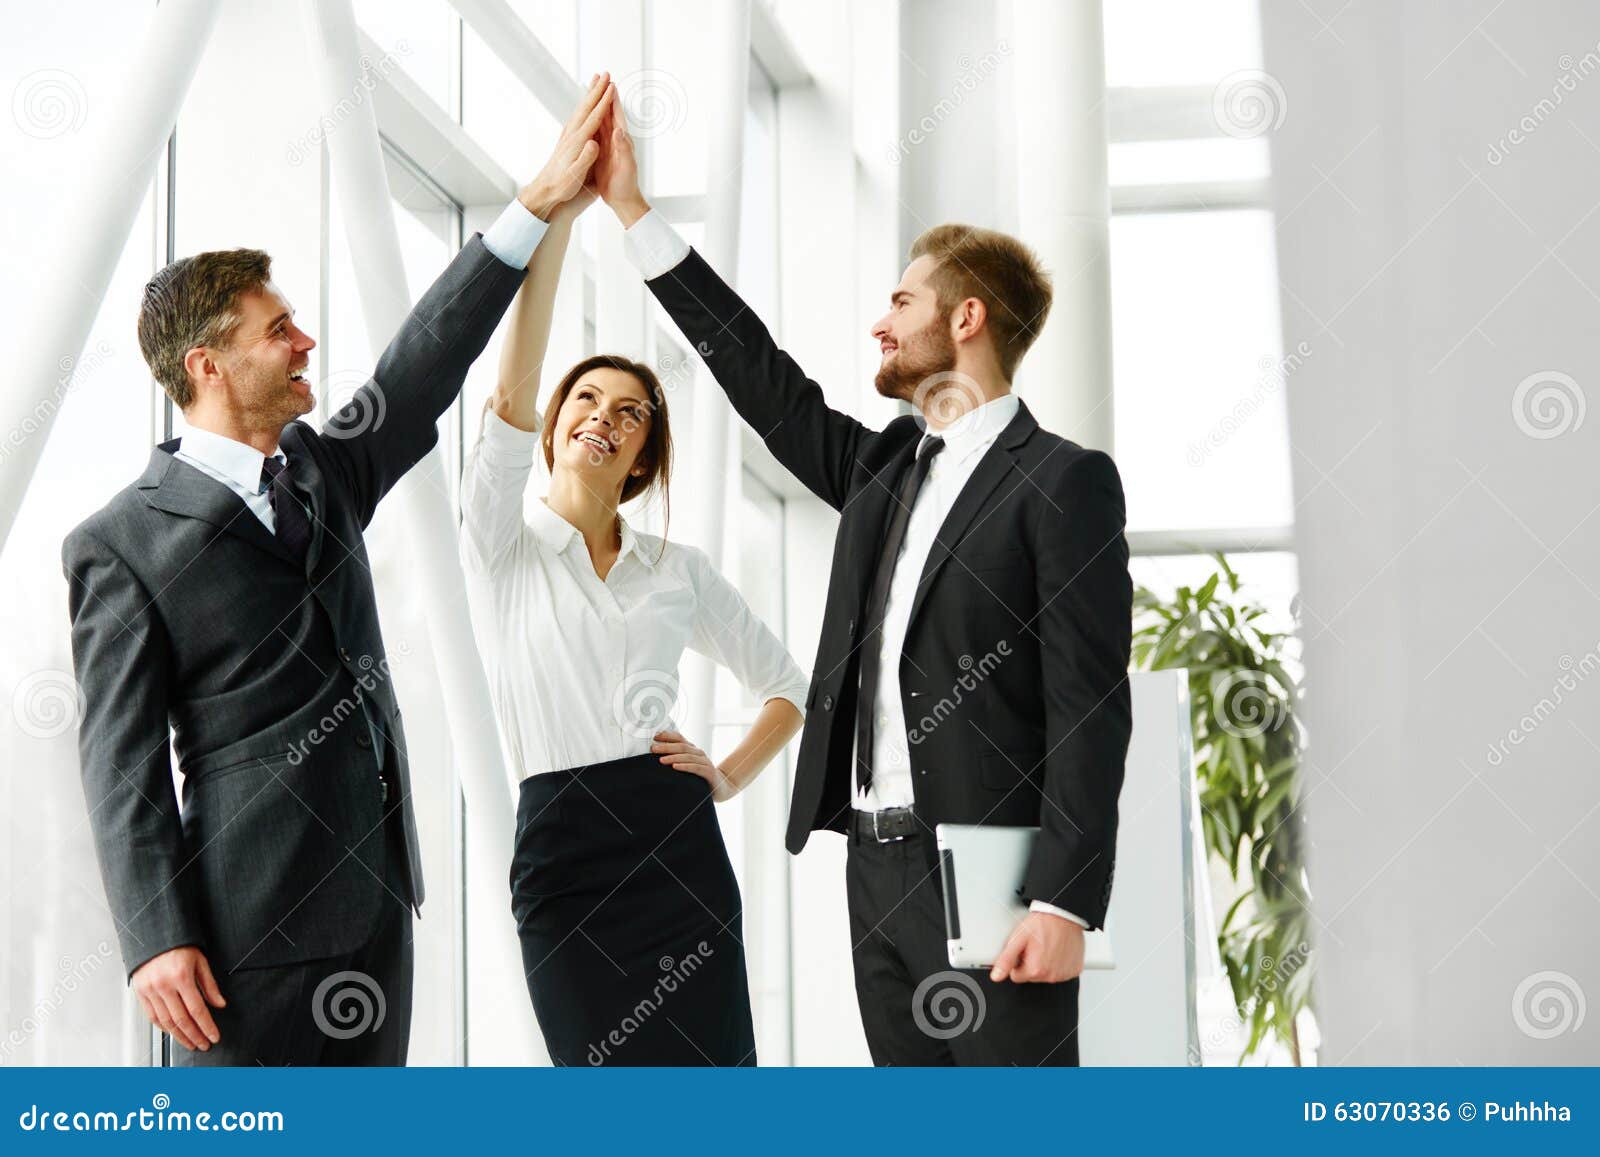 business team. successful business people celebrating a deal